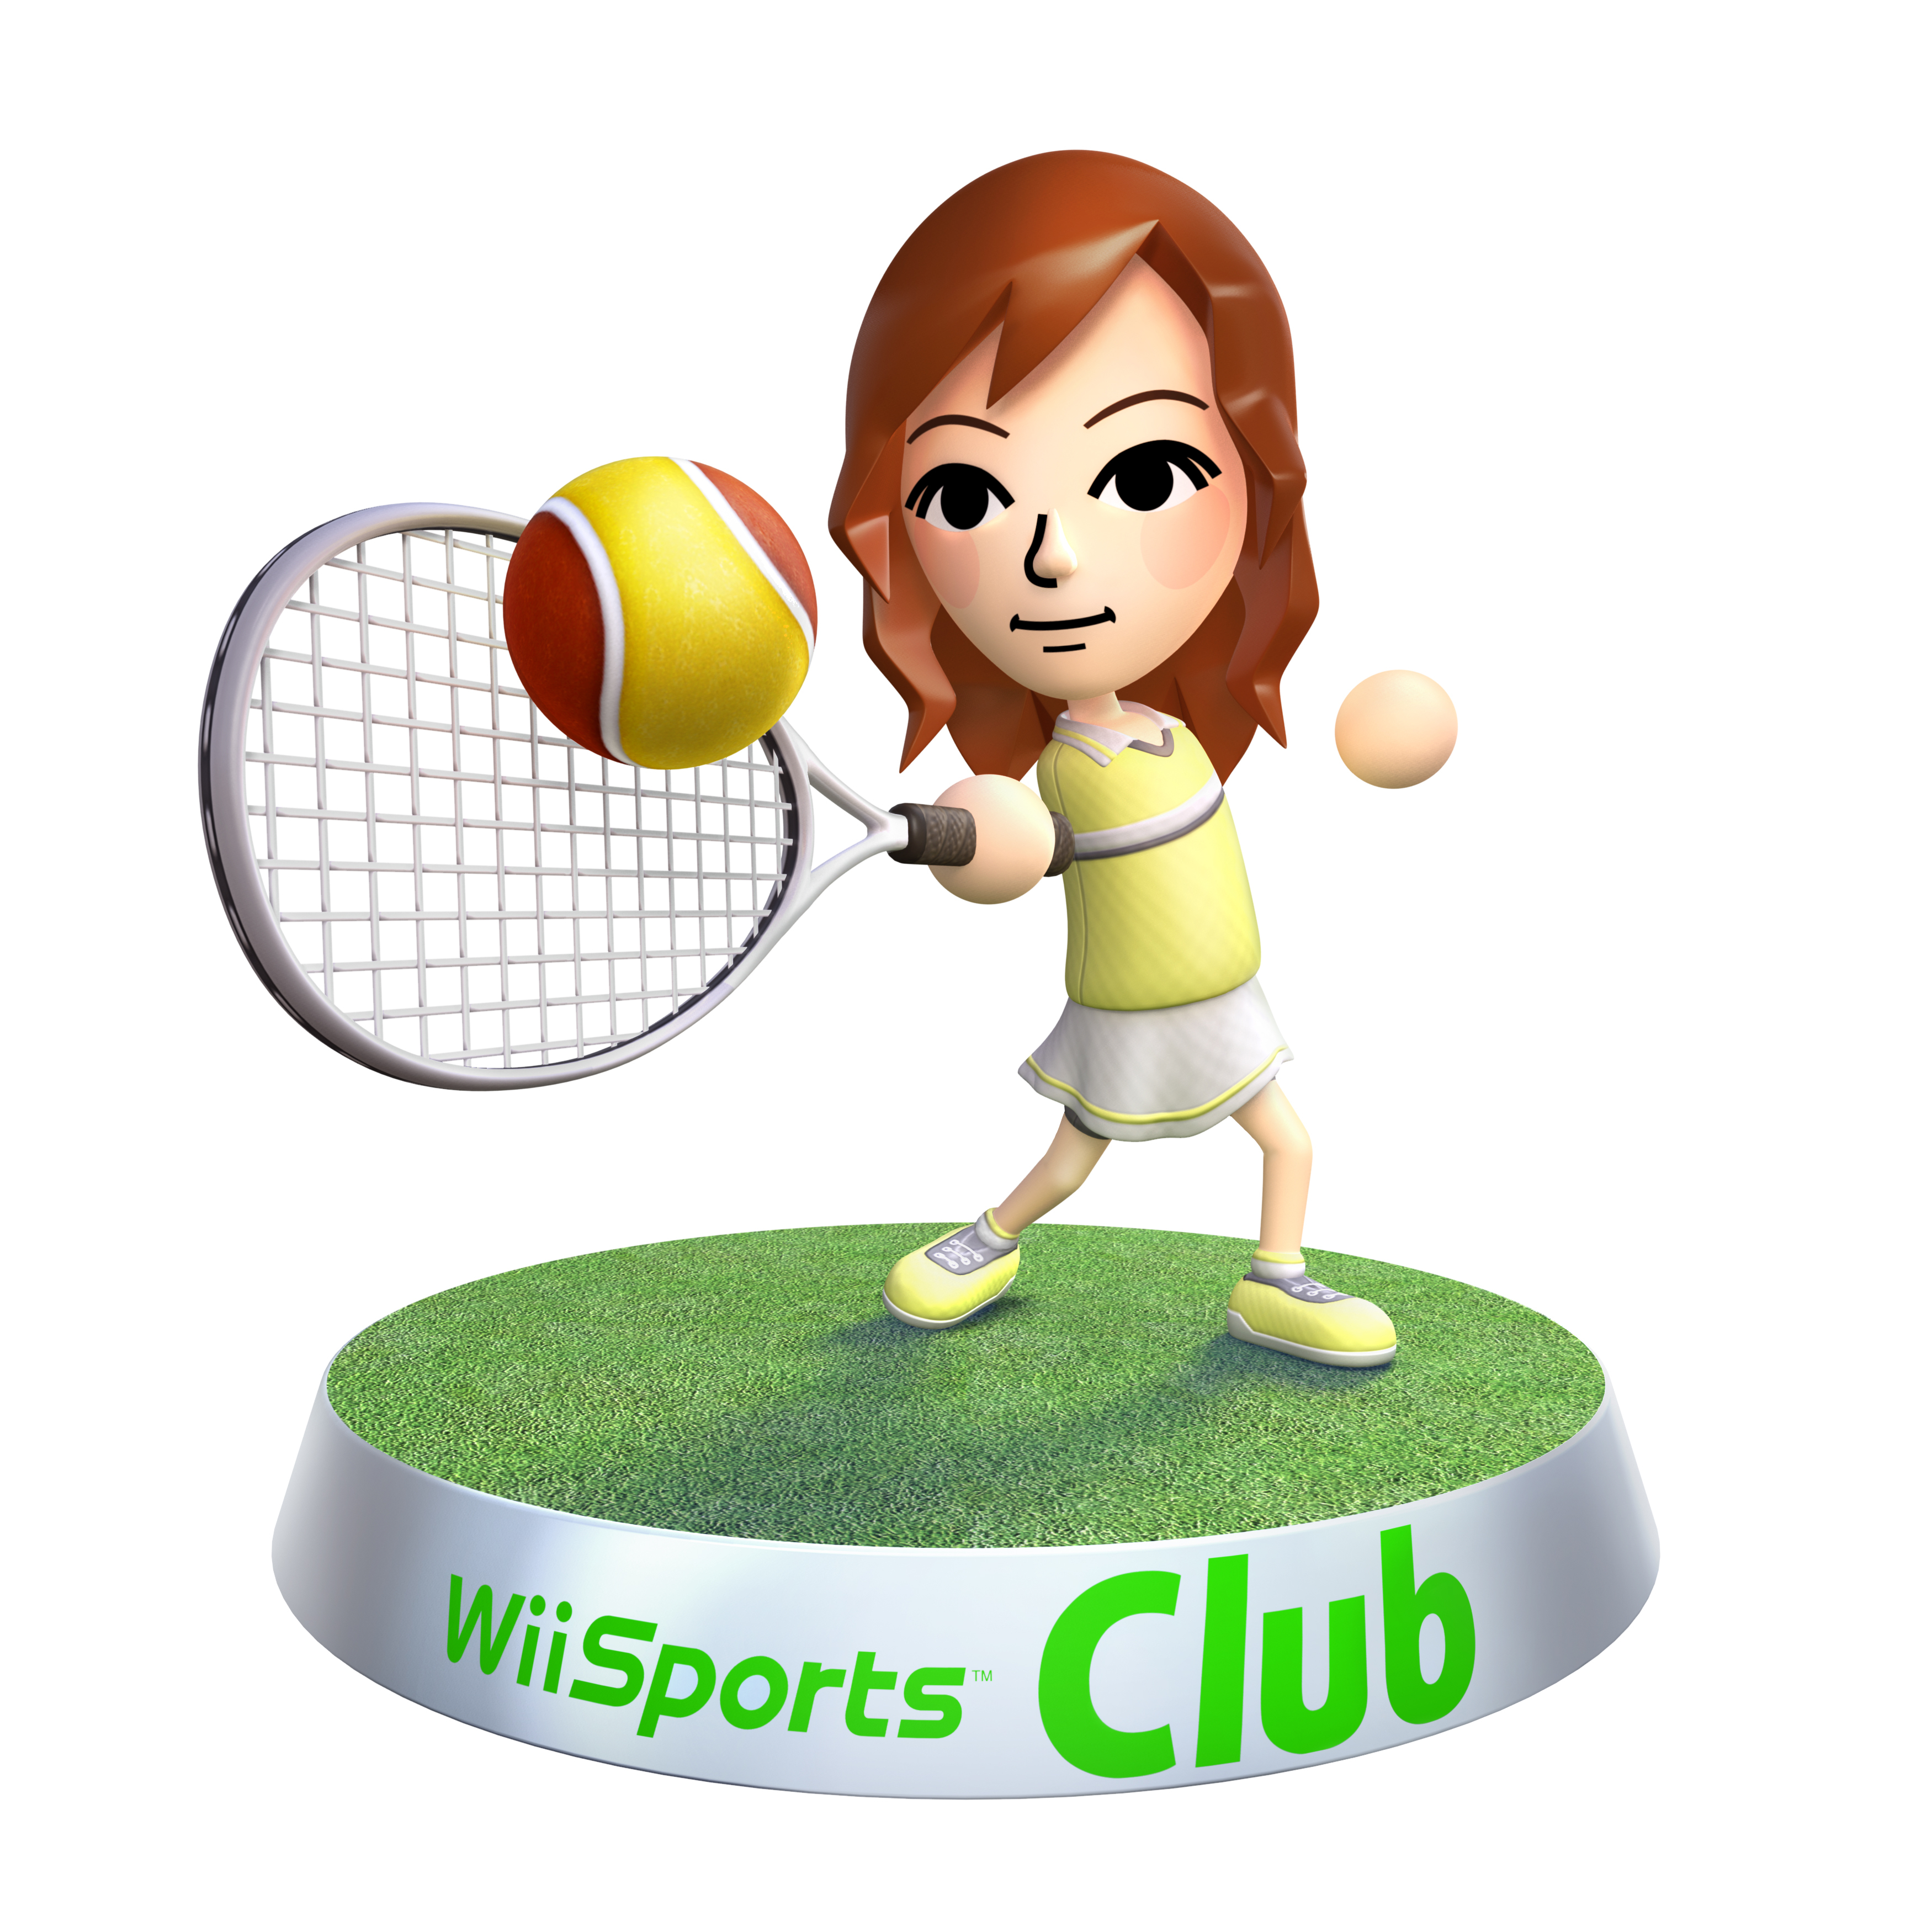 Nintendo News: Wii Sports Club - Tennis and Bowling Now Available